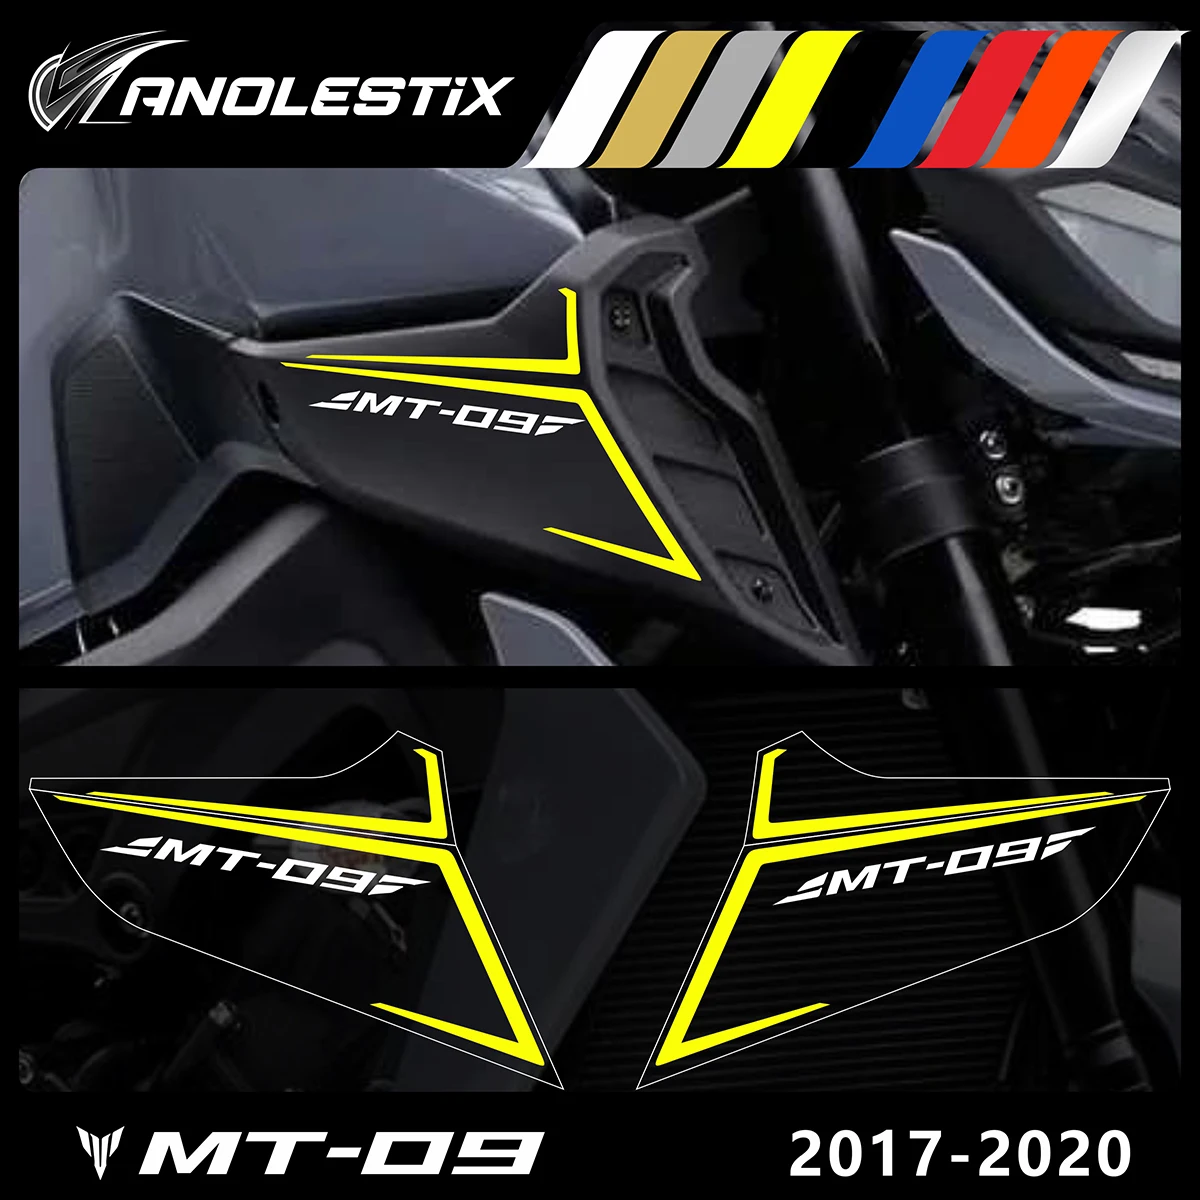 AnoleStix Reflective Motorcycle Stickers Air Intake Side Cover Decals Set For YAMAHA MT09 MT-09 SP 2017 2018 2019 2020 for yamaha fz09 fz 09 09 fz sp mt 09 mt09 air intake side cover sticker set fairing cut sticker decals custom color reflective